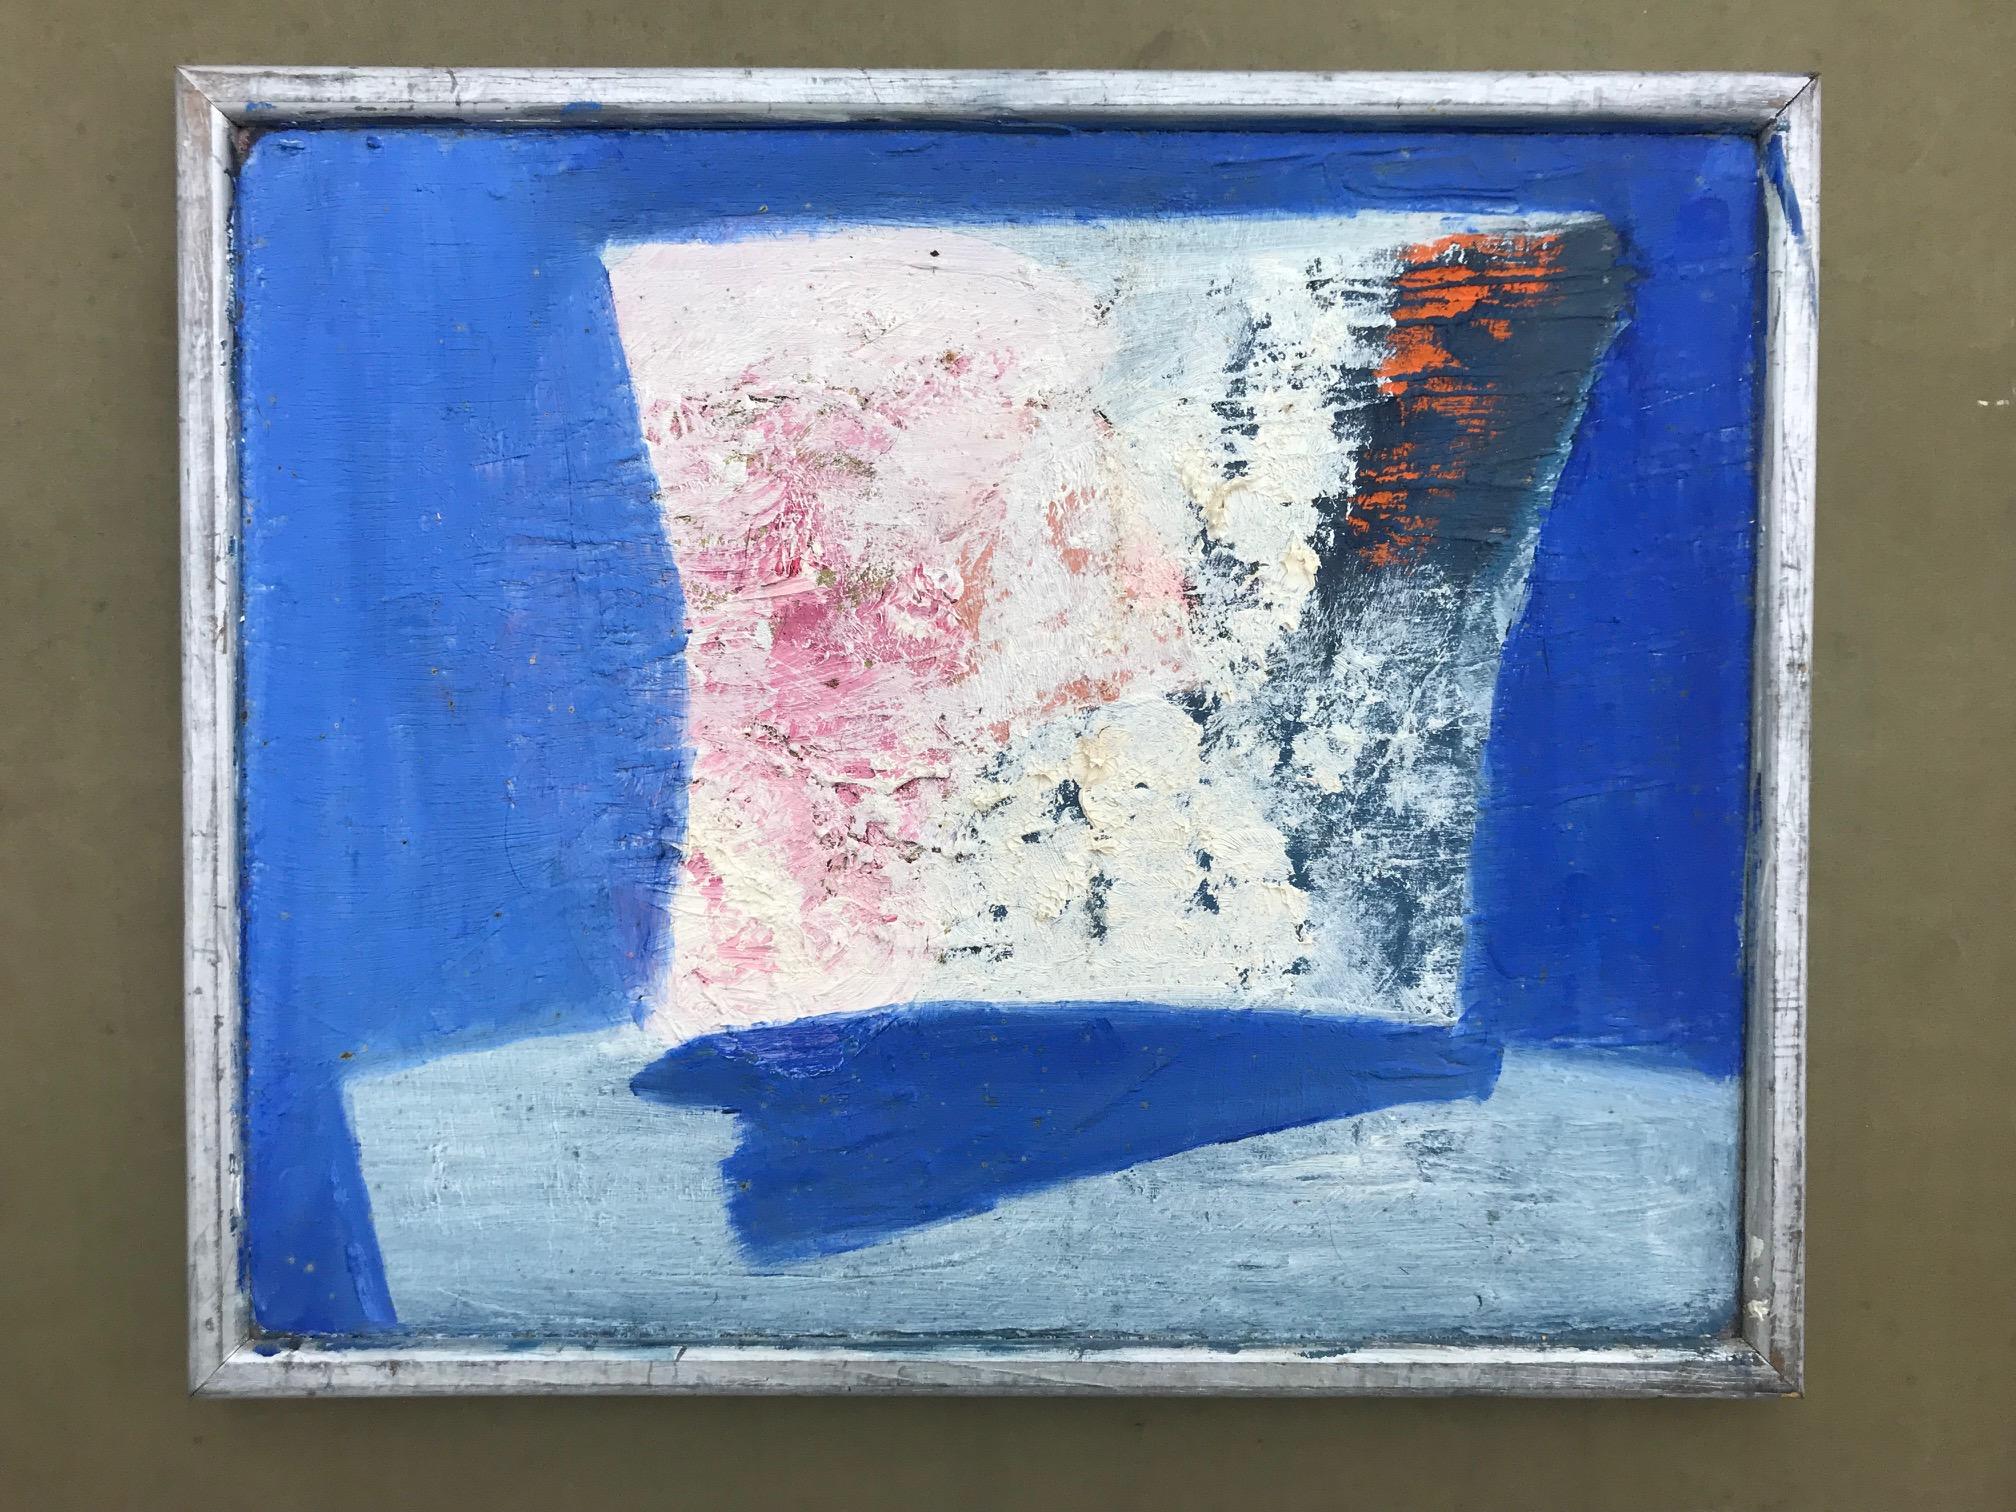 A small striking oil on canvas abstract by the incredibly interesting British painter, draughtsman, writer, lecturer and film maker Oswell Blakeston. His real name was Henry Hasslacher, the name Oswell derived from the writer Osbert Sitwell. Oswell